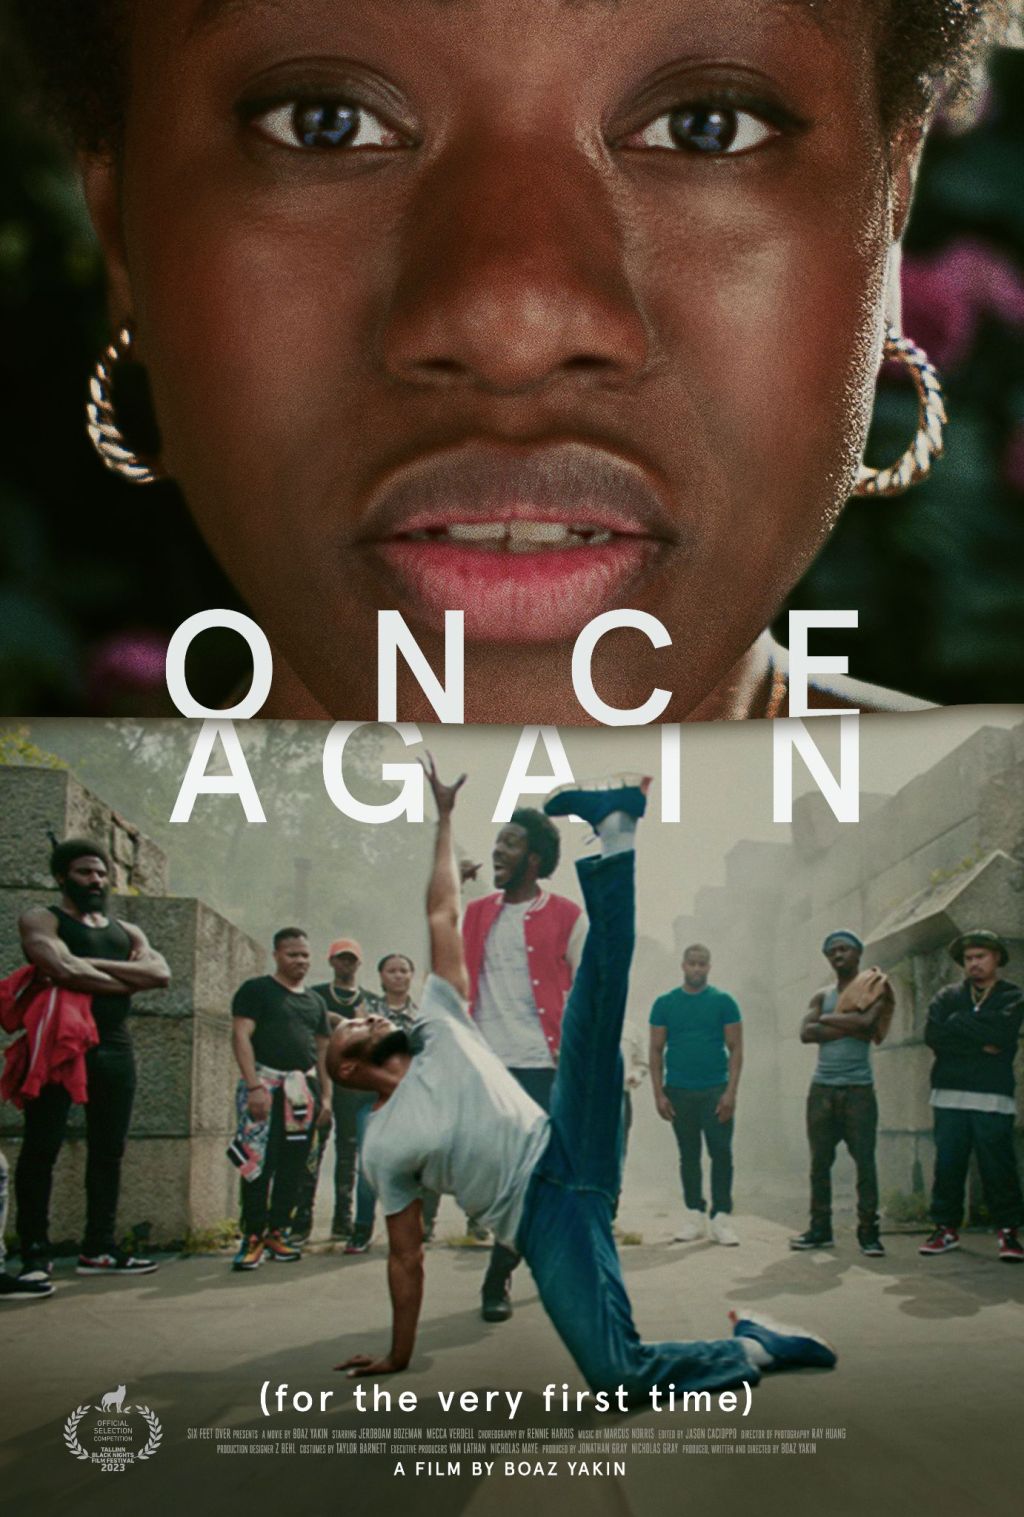 "ONCE AGAIN’ (for the very first time)" Key Art